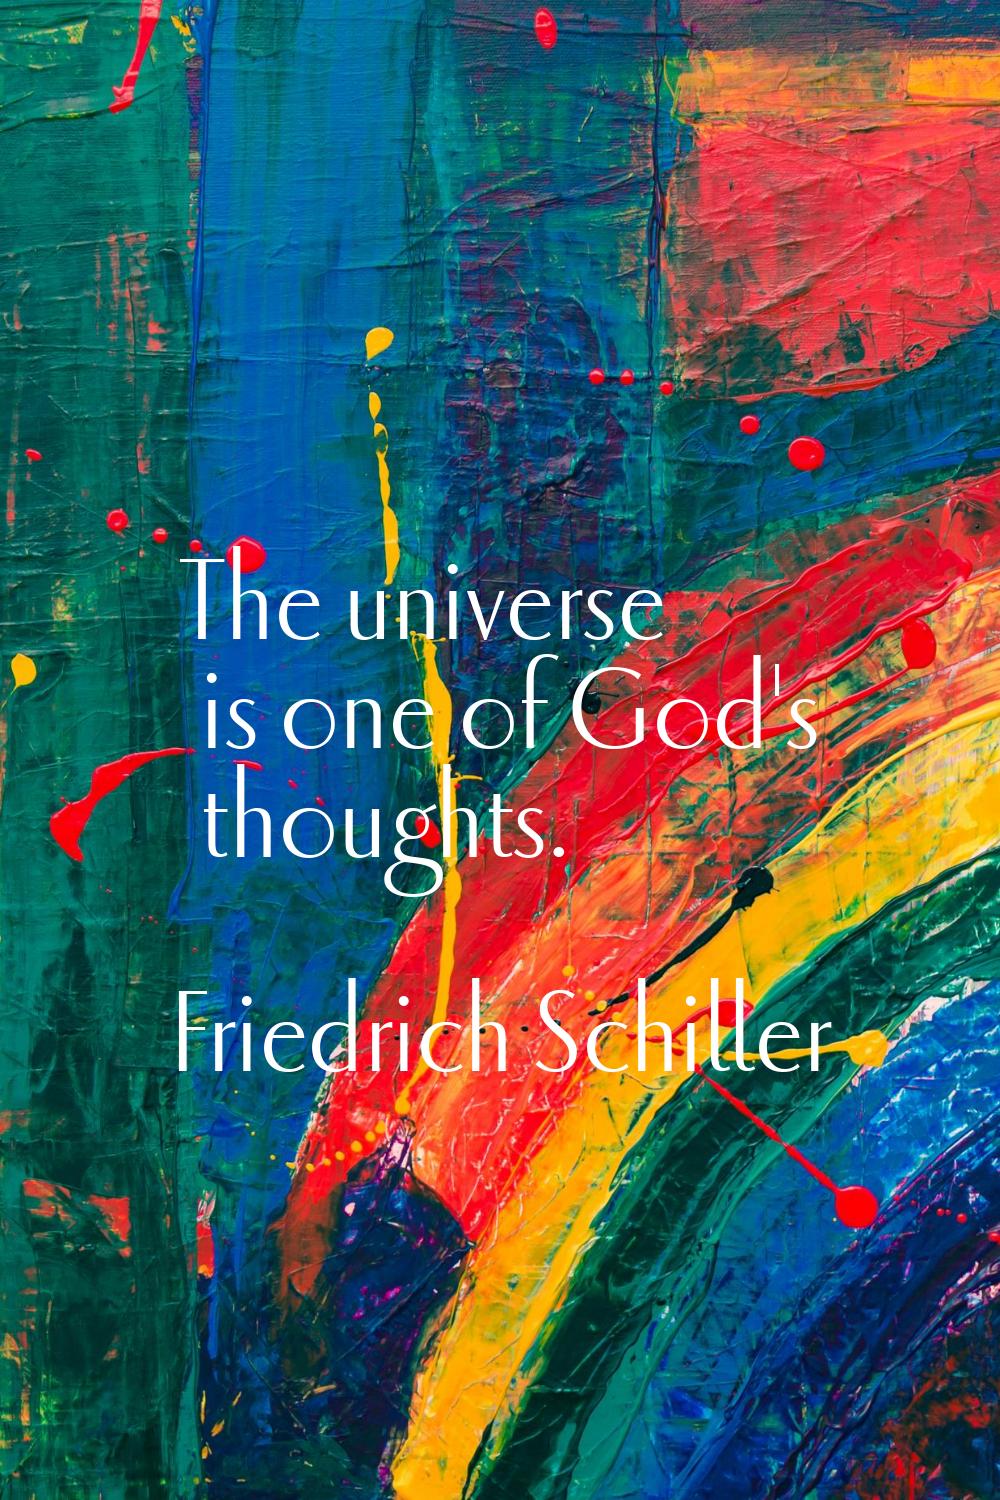 The universe is one of God's thoughts.